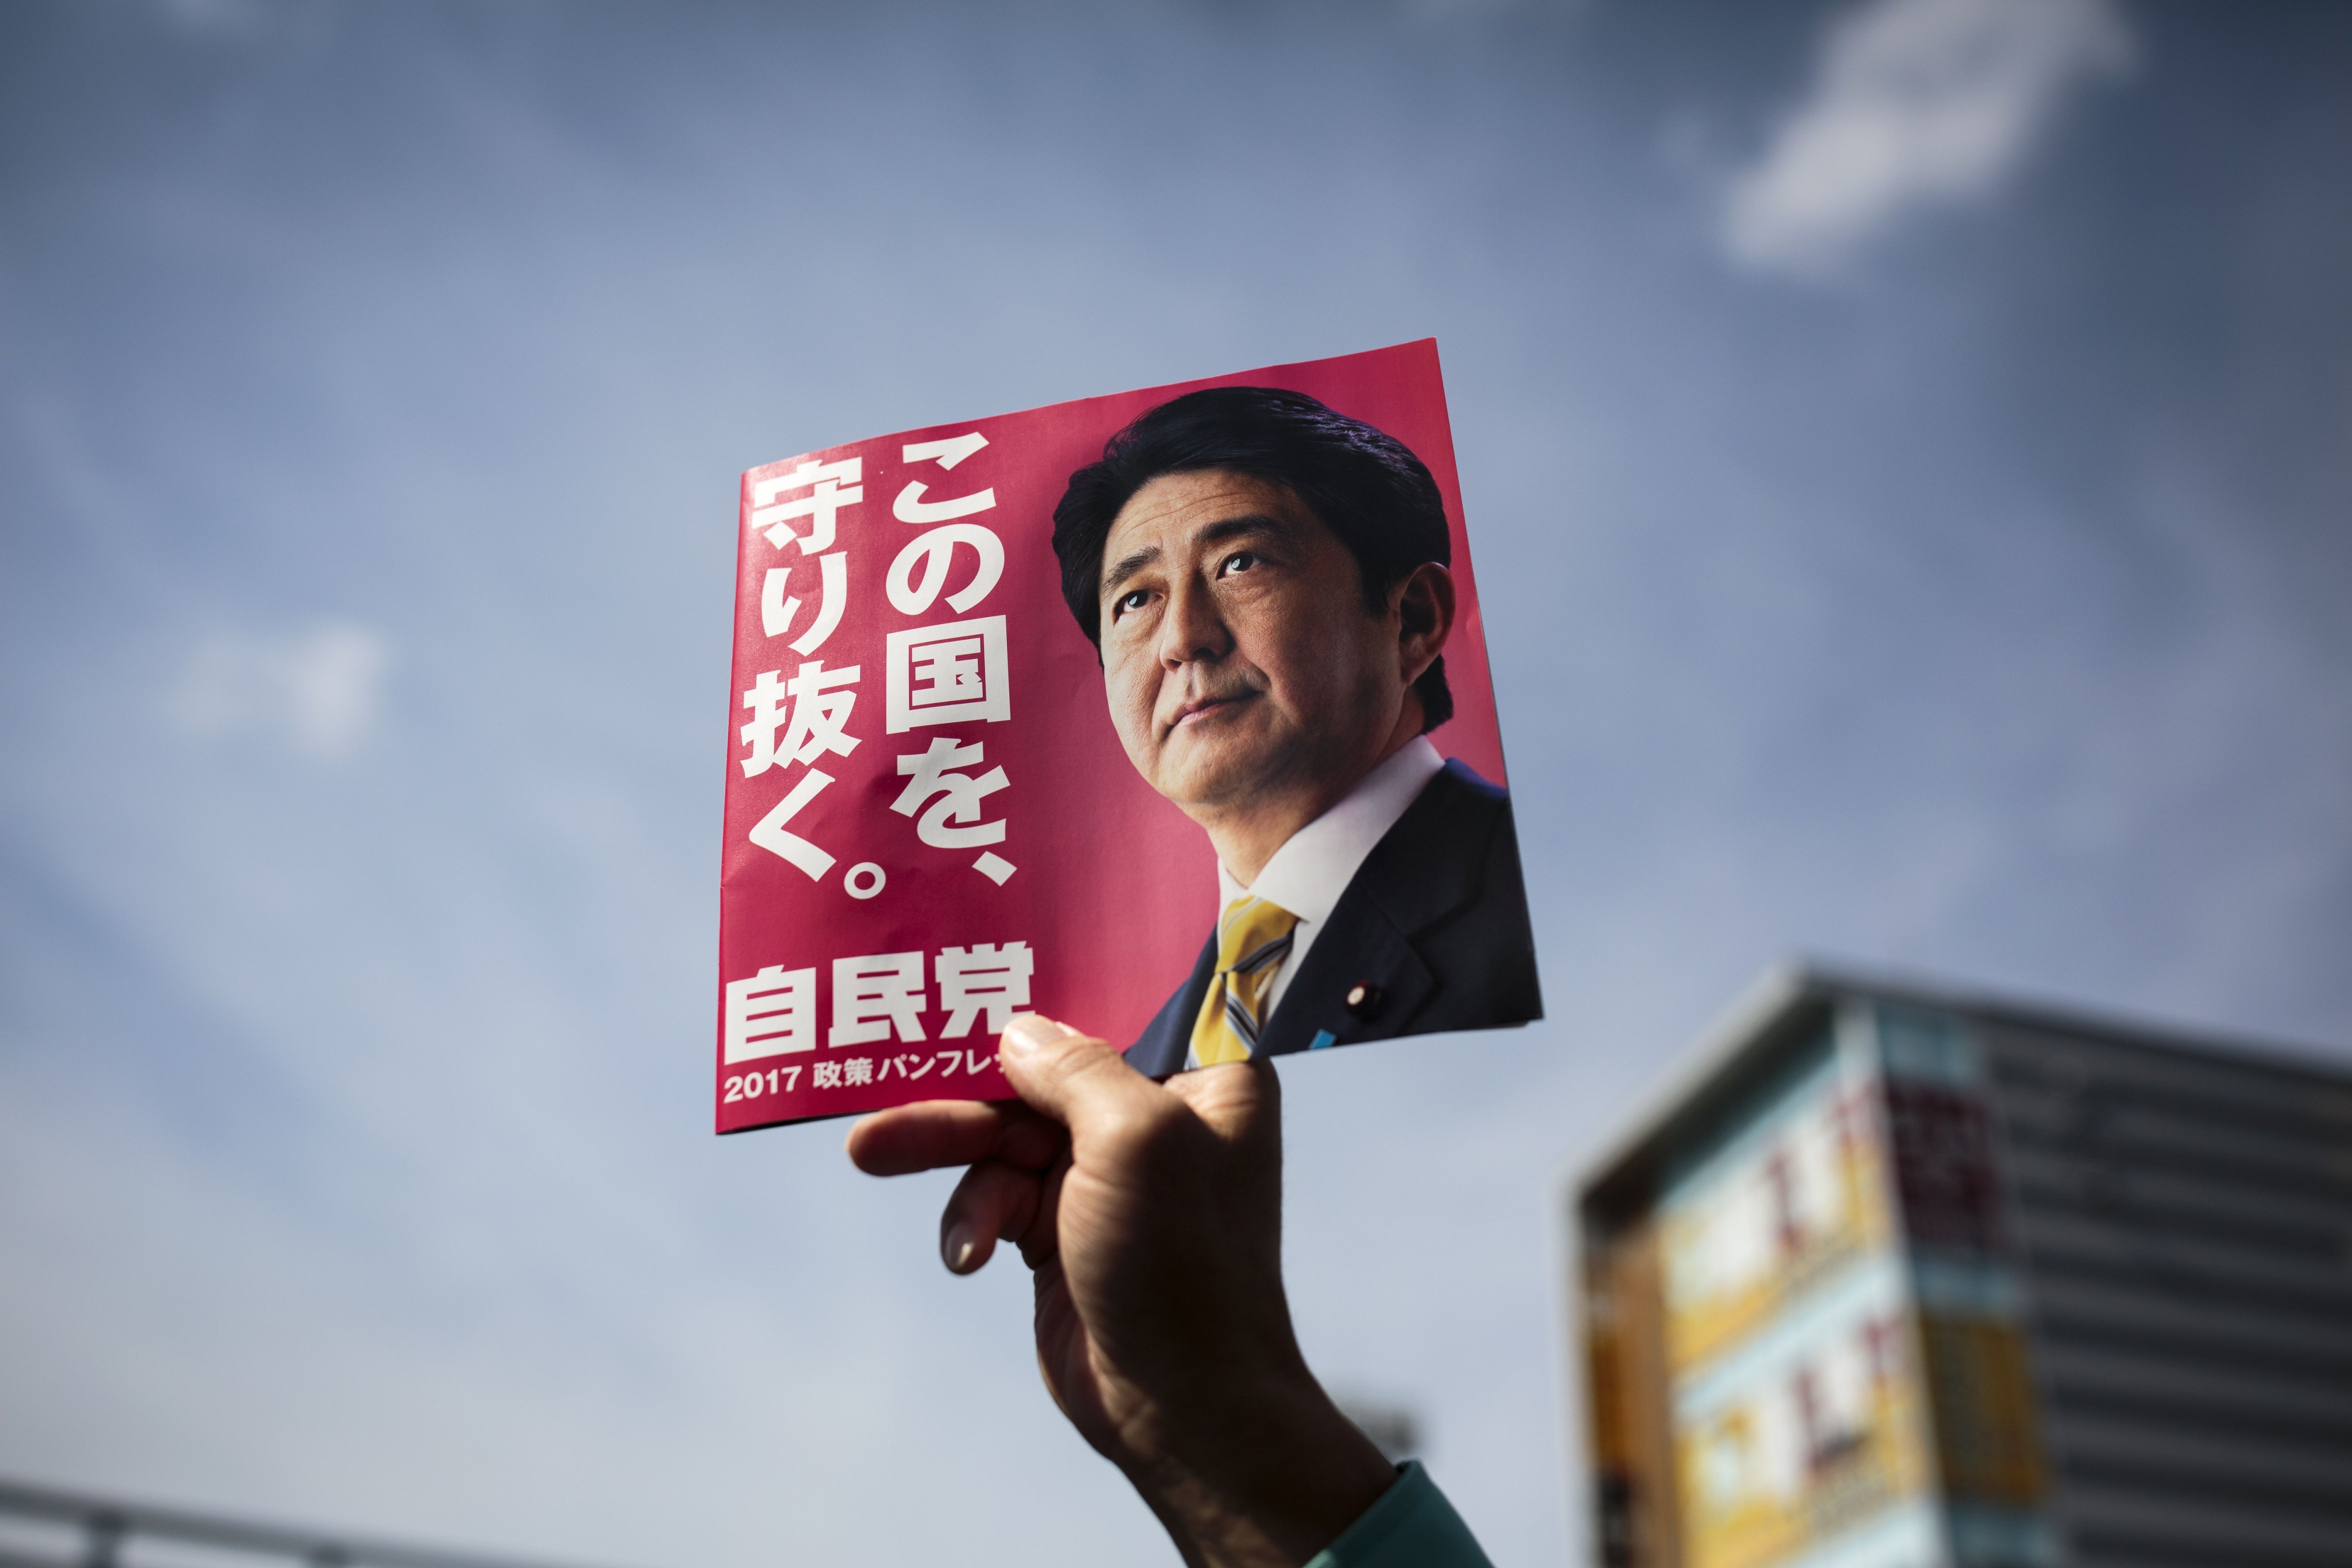 In this picture taken on October 18, 2017, a man holds an electoral leaflet showing Japan's Prime Minister and ruling Liberal Democratic Party (LDP) president Shinzo Abe during an election campaign in Saitama. (BEHROUZ MEHRI—AFP/Getty Images)